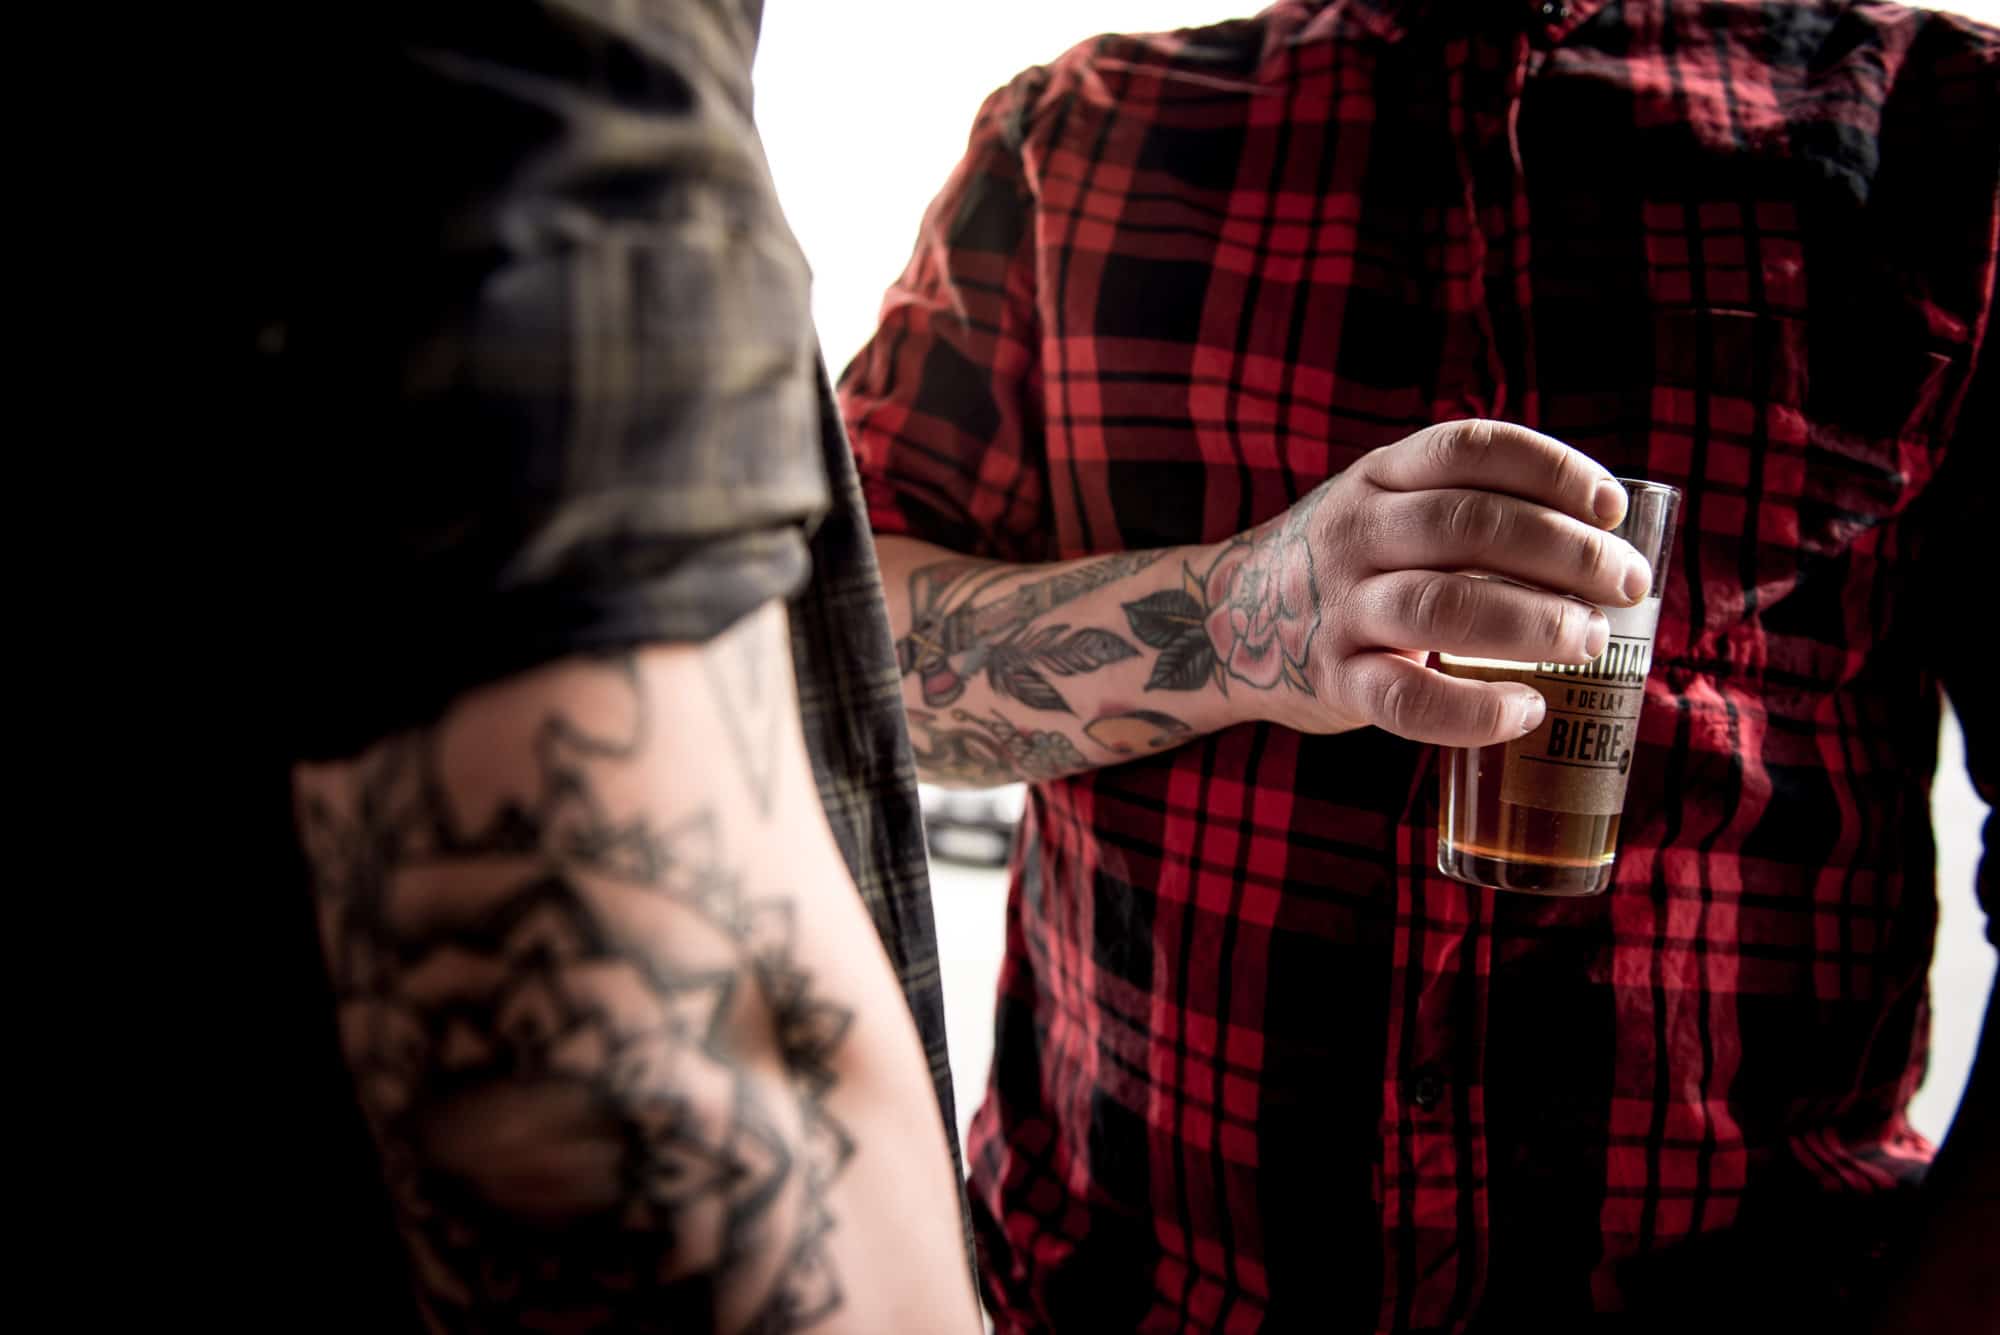 The Paris Beer Festival takes place in May, and allows you to taste lots of different craft beers like this tattooed man holding a glass of beer.